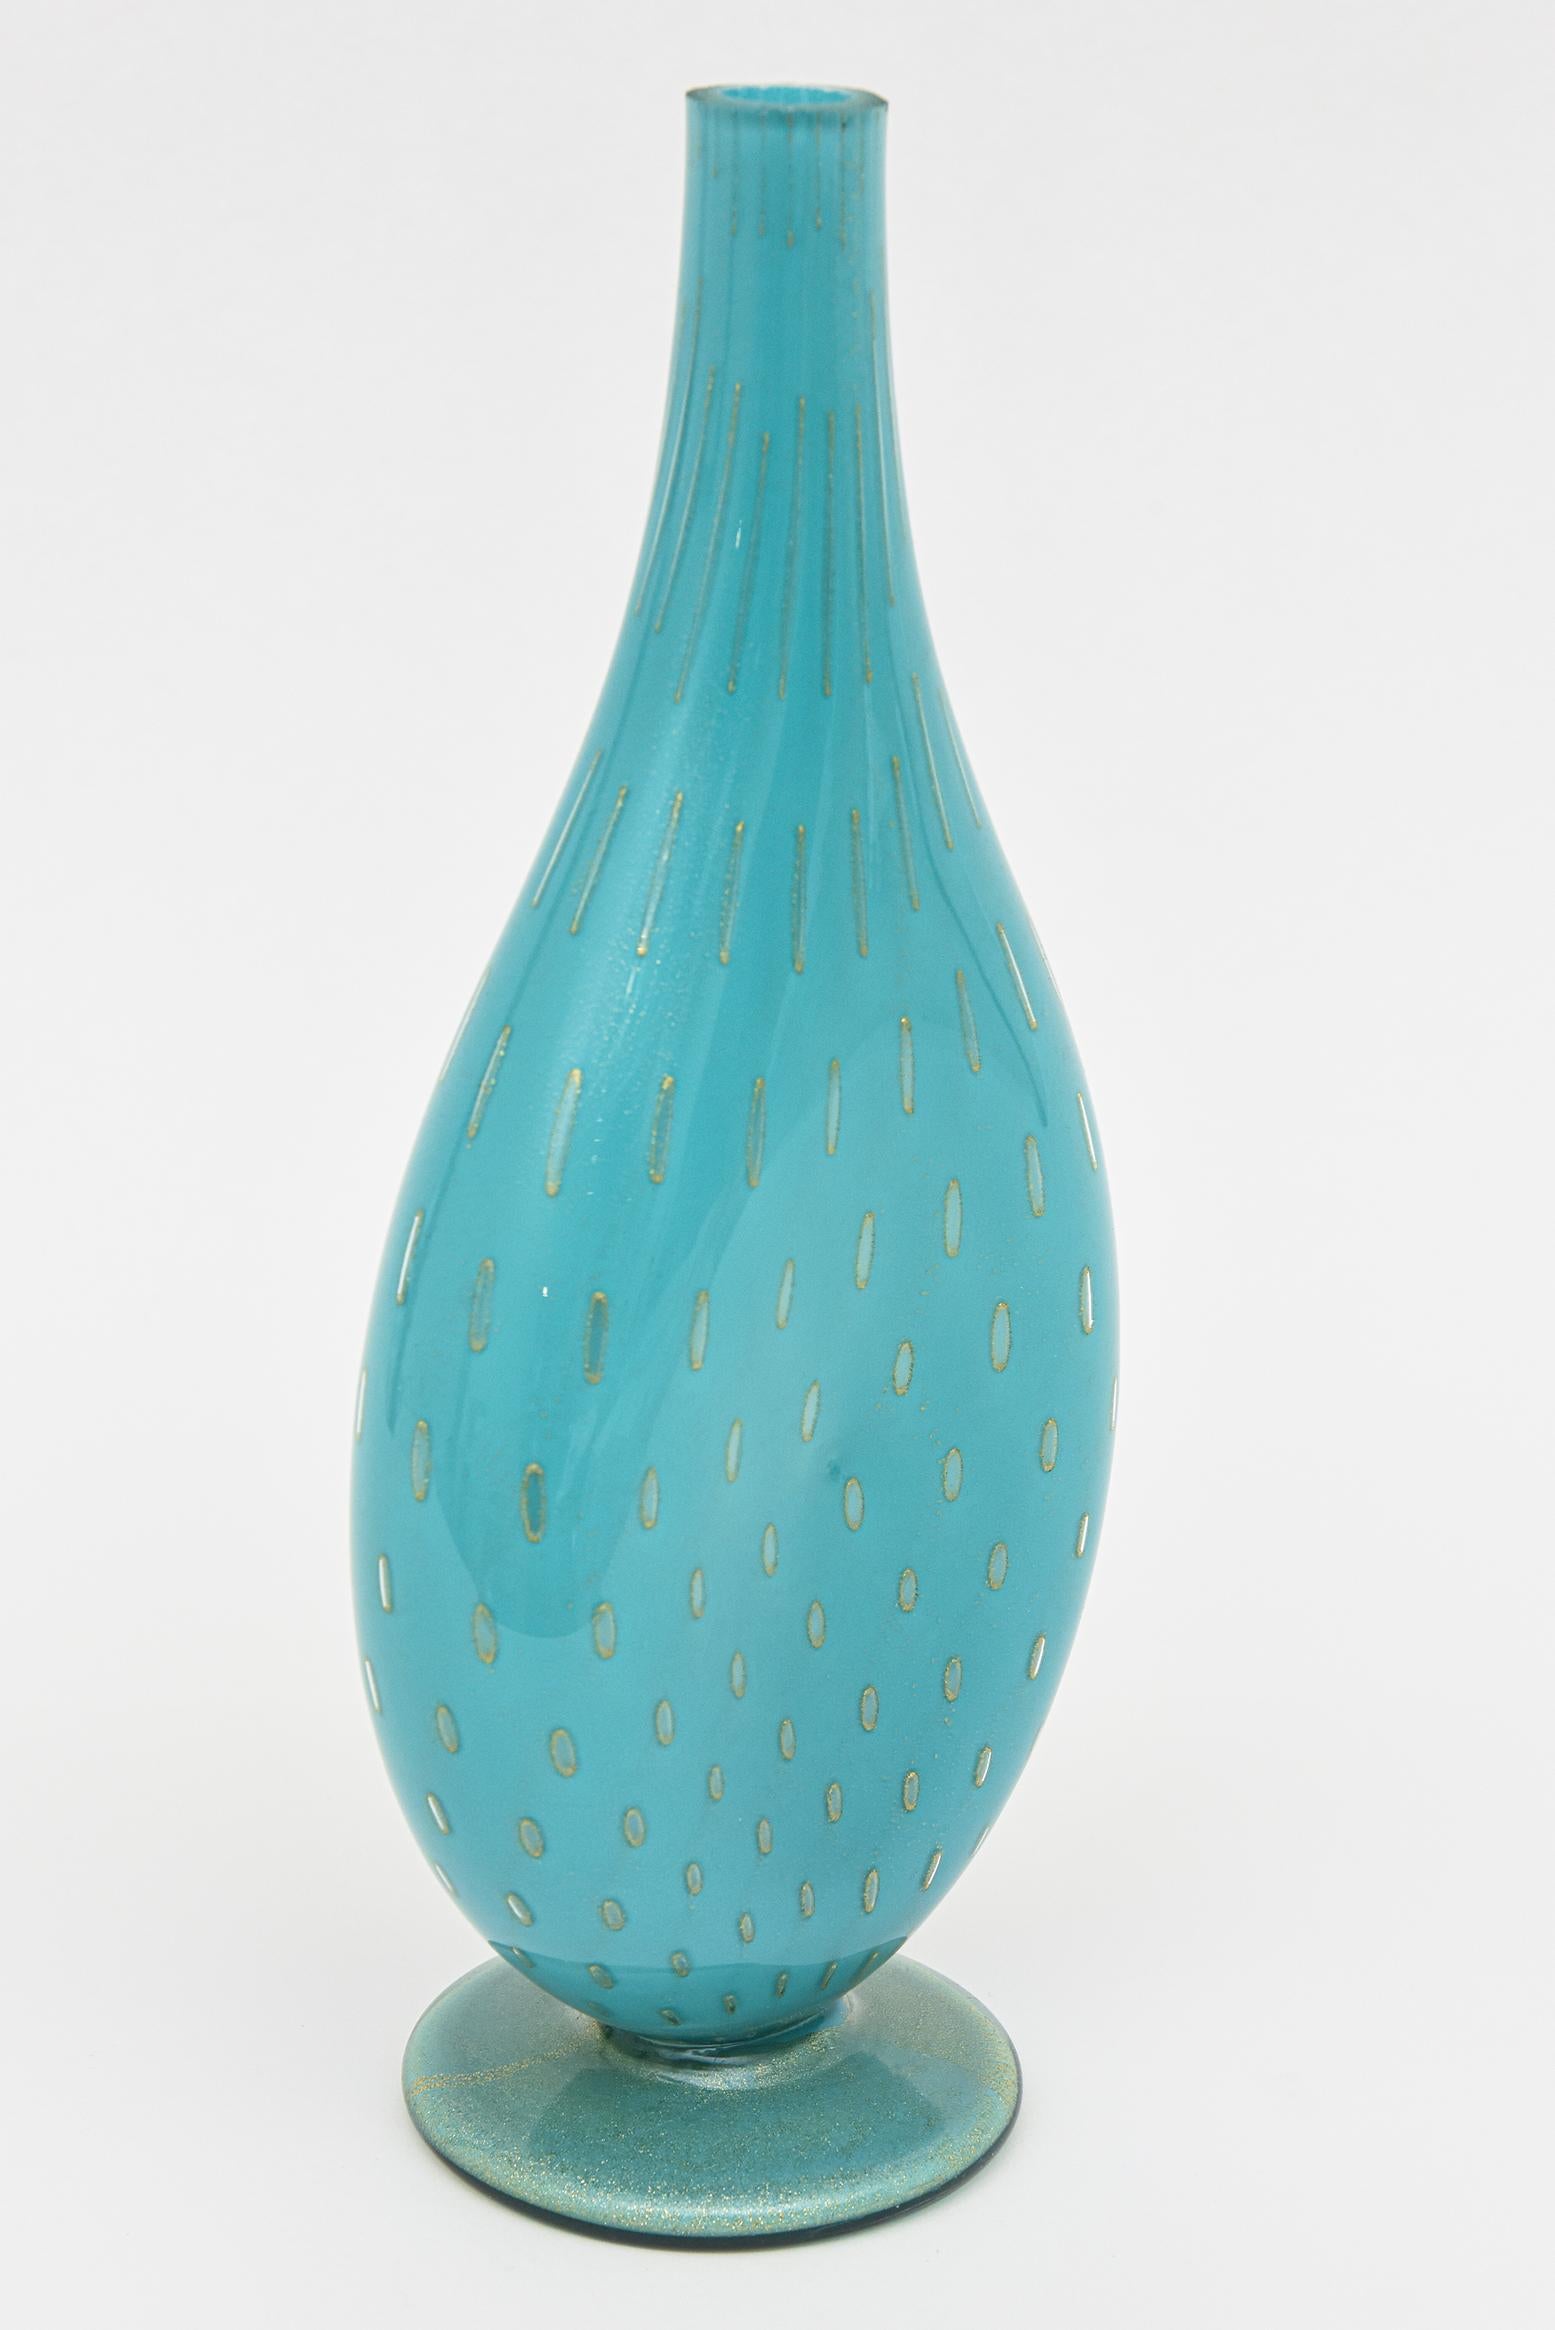 Vintage Barovier e Toso Murano Turquoise Glass Vessel Bottle With Gold Droplets For Sale 2